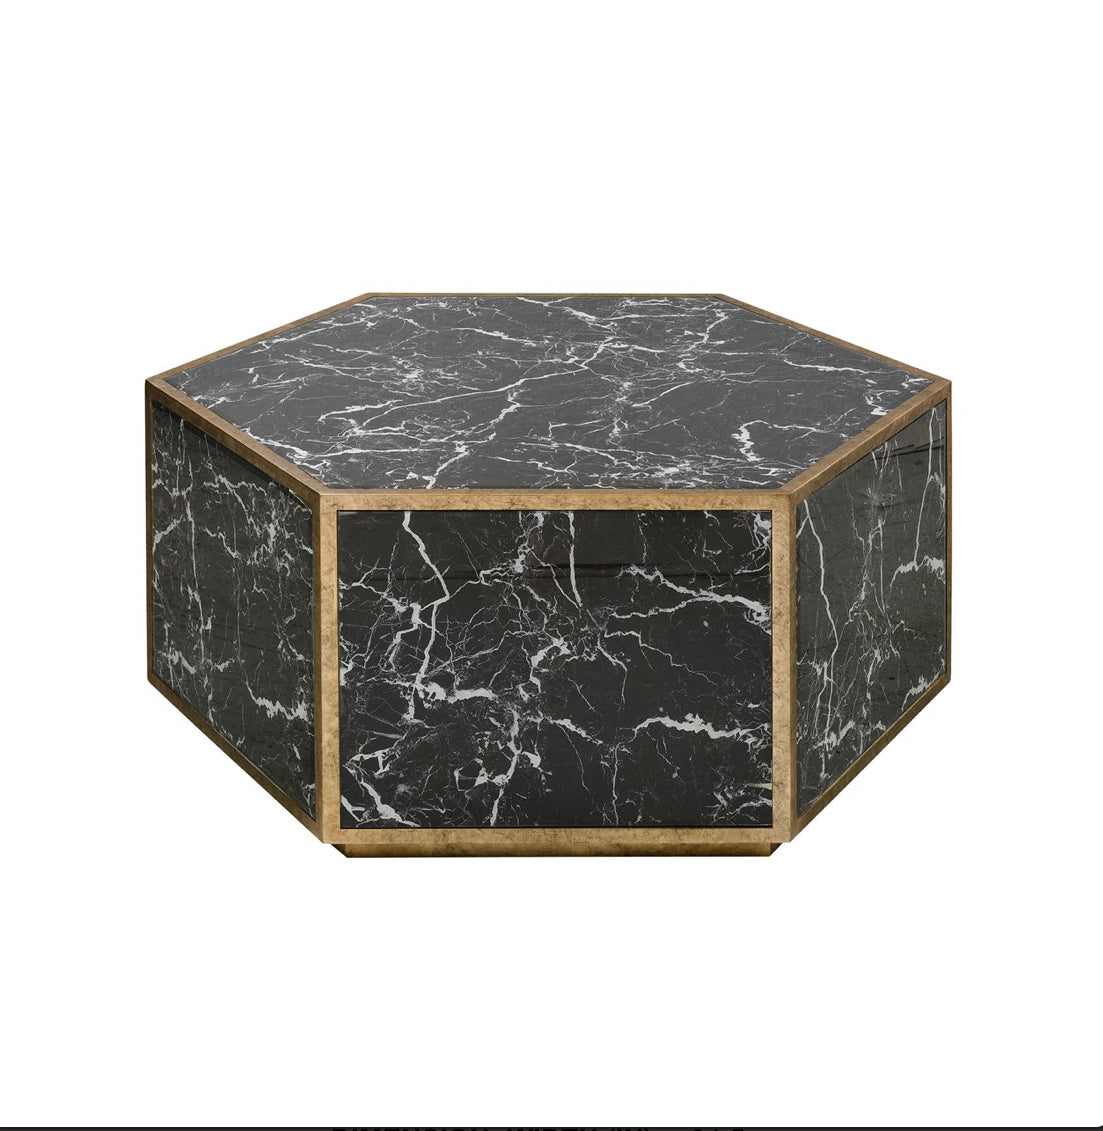 Dimension: Height 16” Legnth35  Width 34.5 Weight 62.93  Finish: Black Marble, Gold leaf,   Style:Transitional   